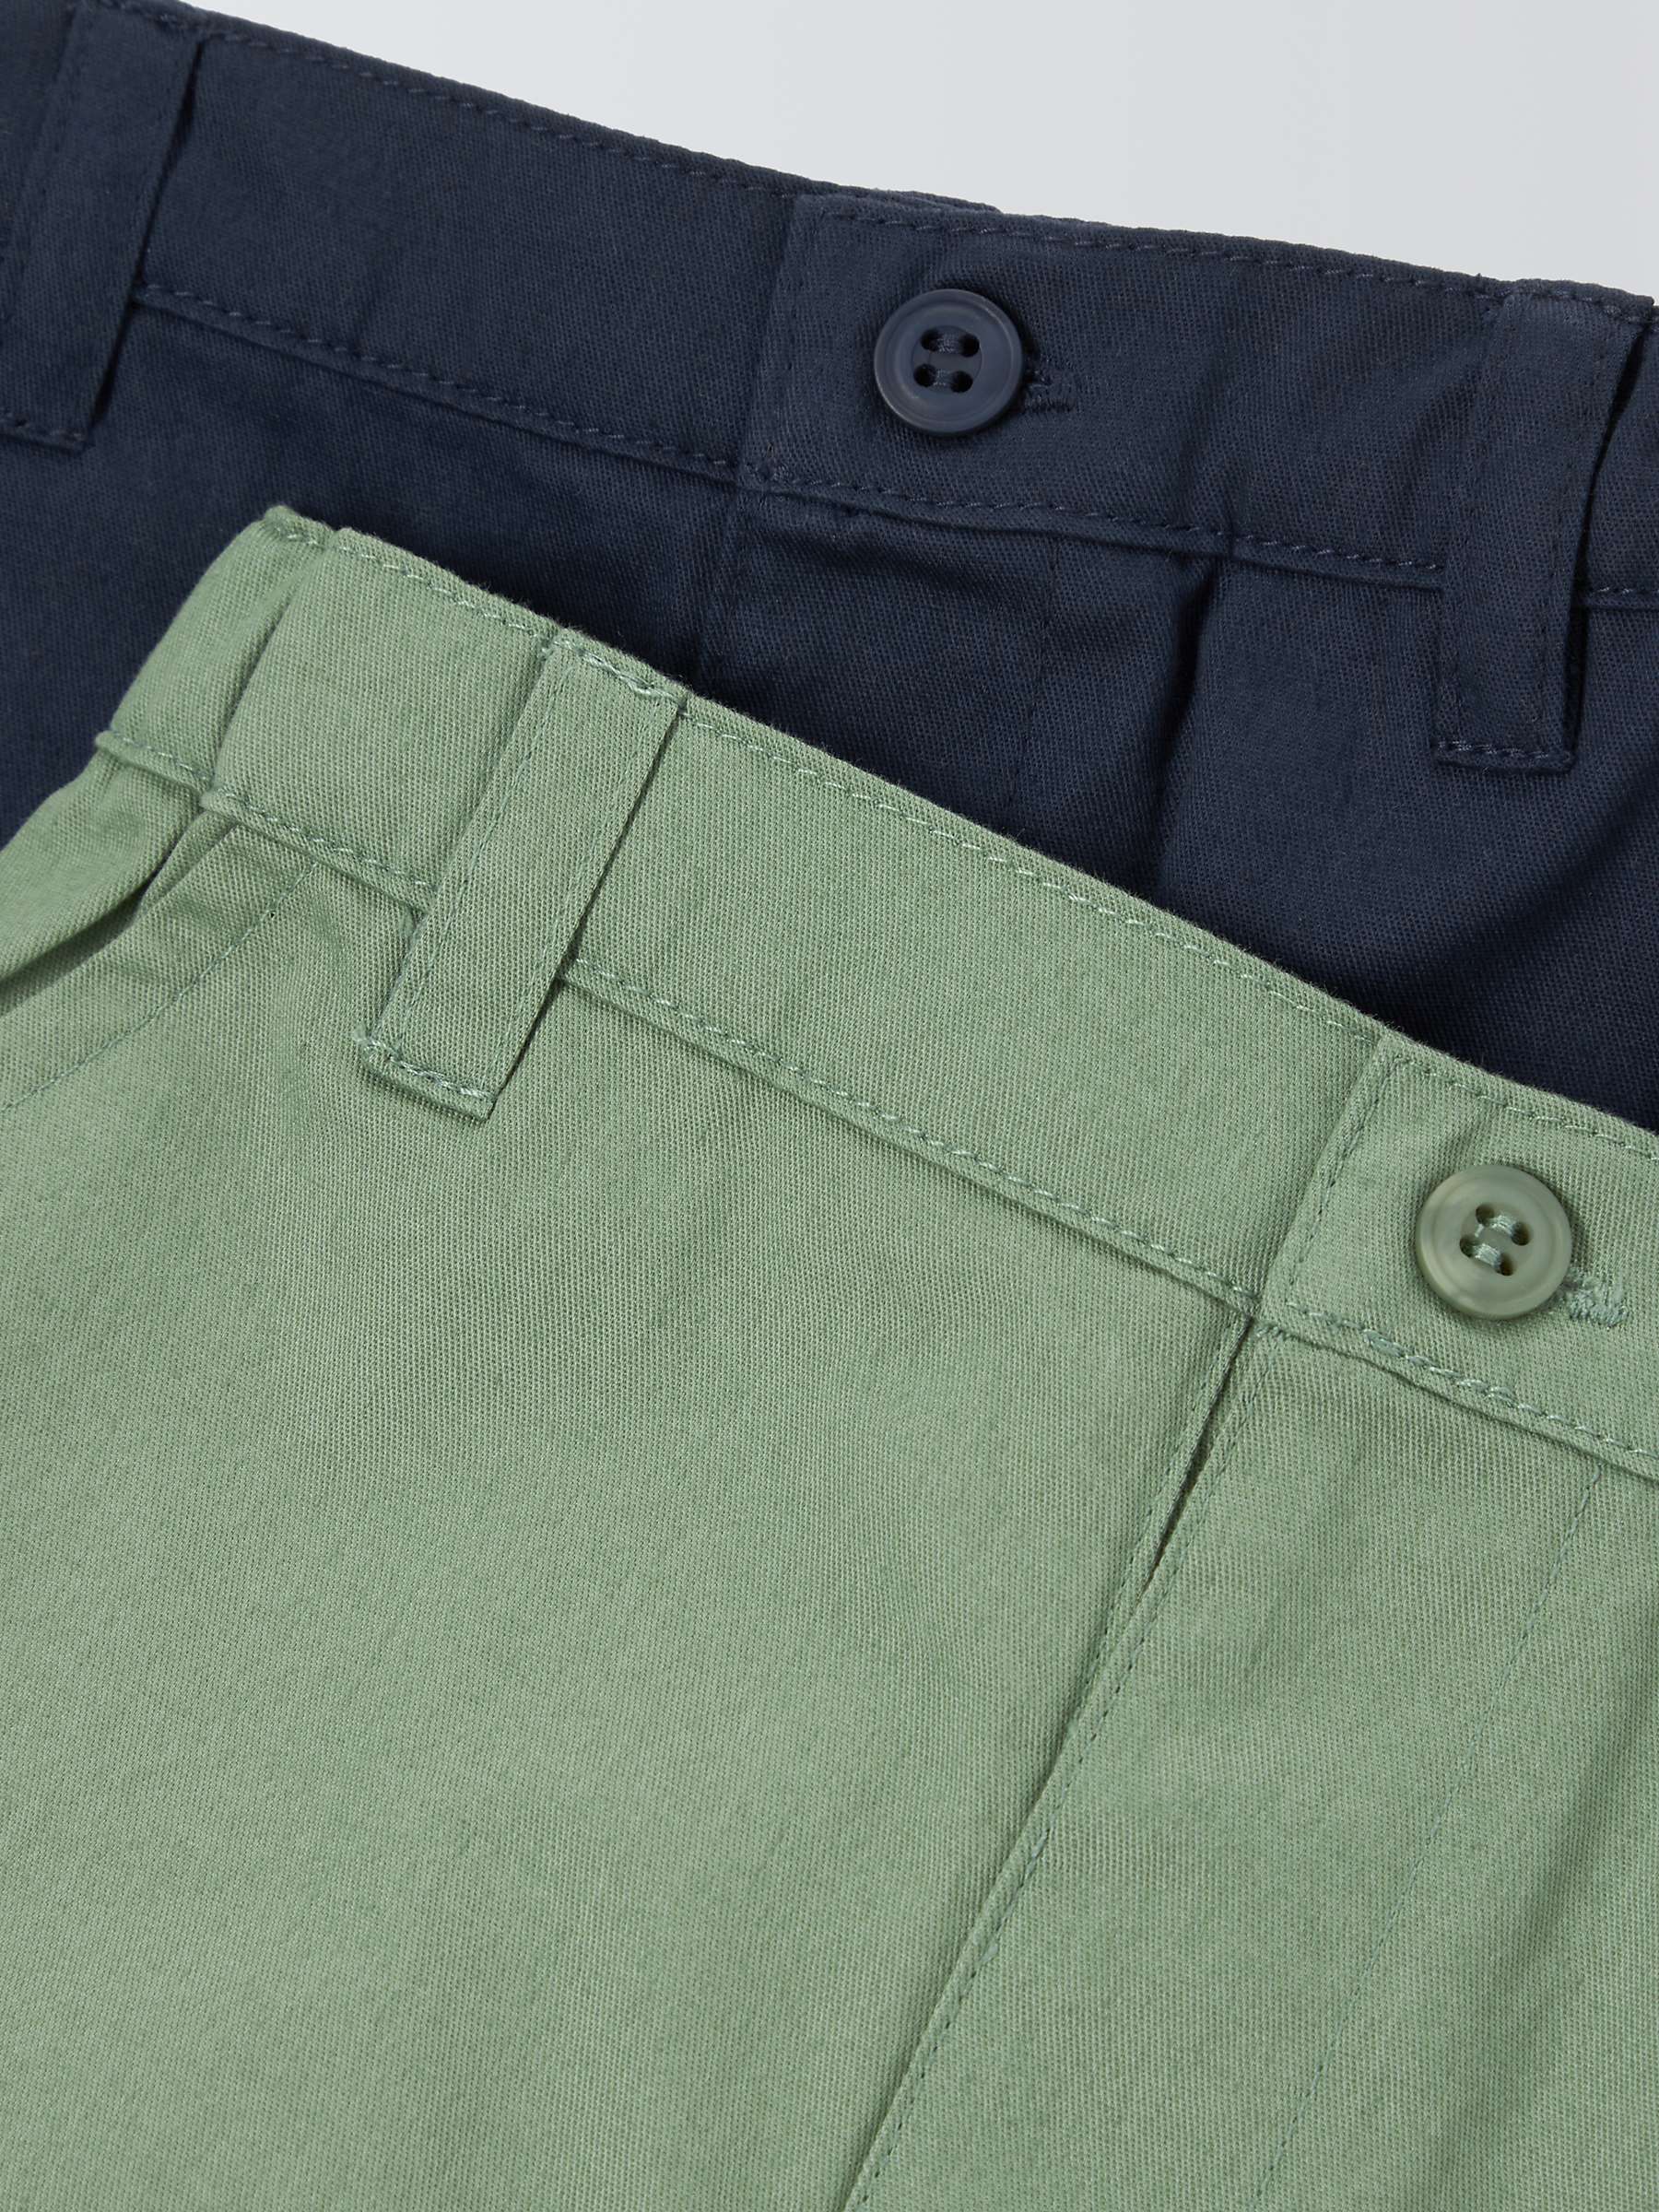 Buy John Lewis Heirloom Collection Baby Chino Shorts, Pack of 2, Green/Navy Online at johnlewis.com